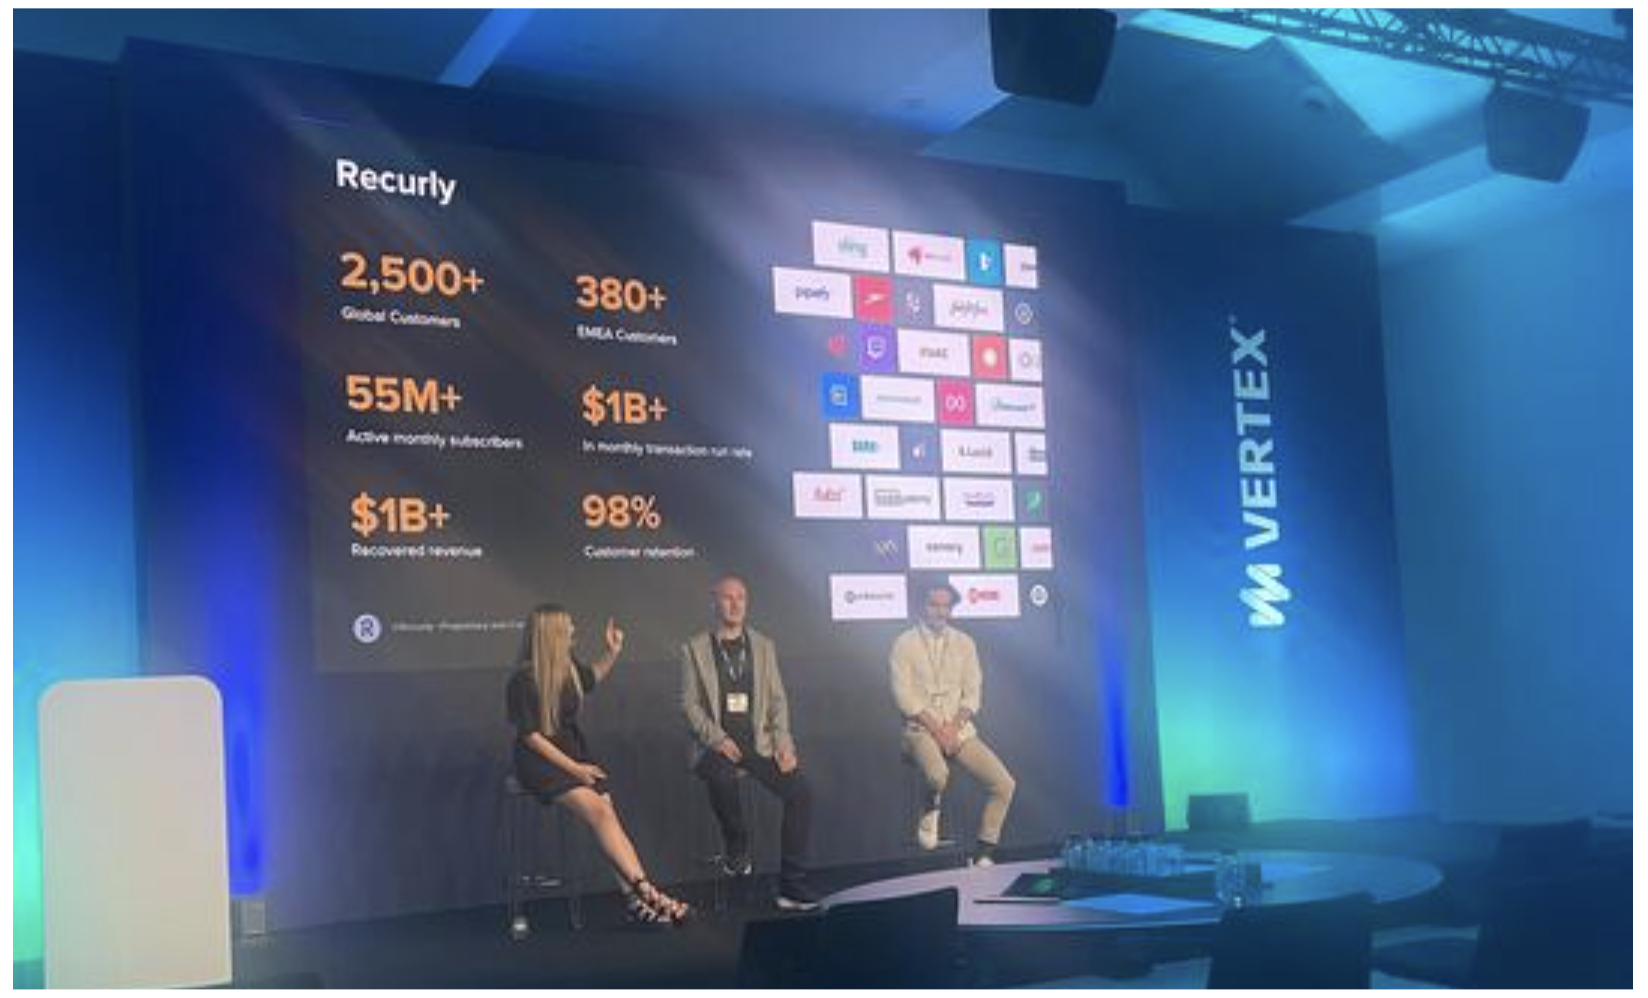 Images from the Recurly team at Vertex Exchange Europe 2023.